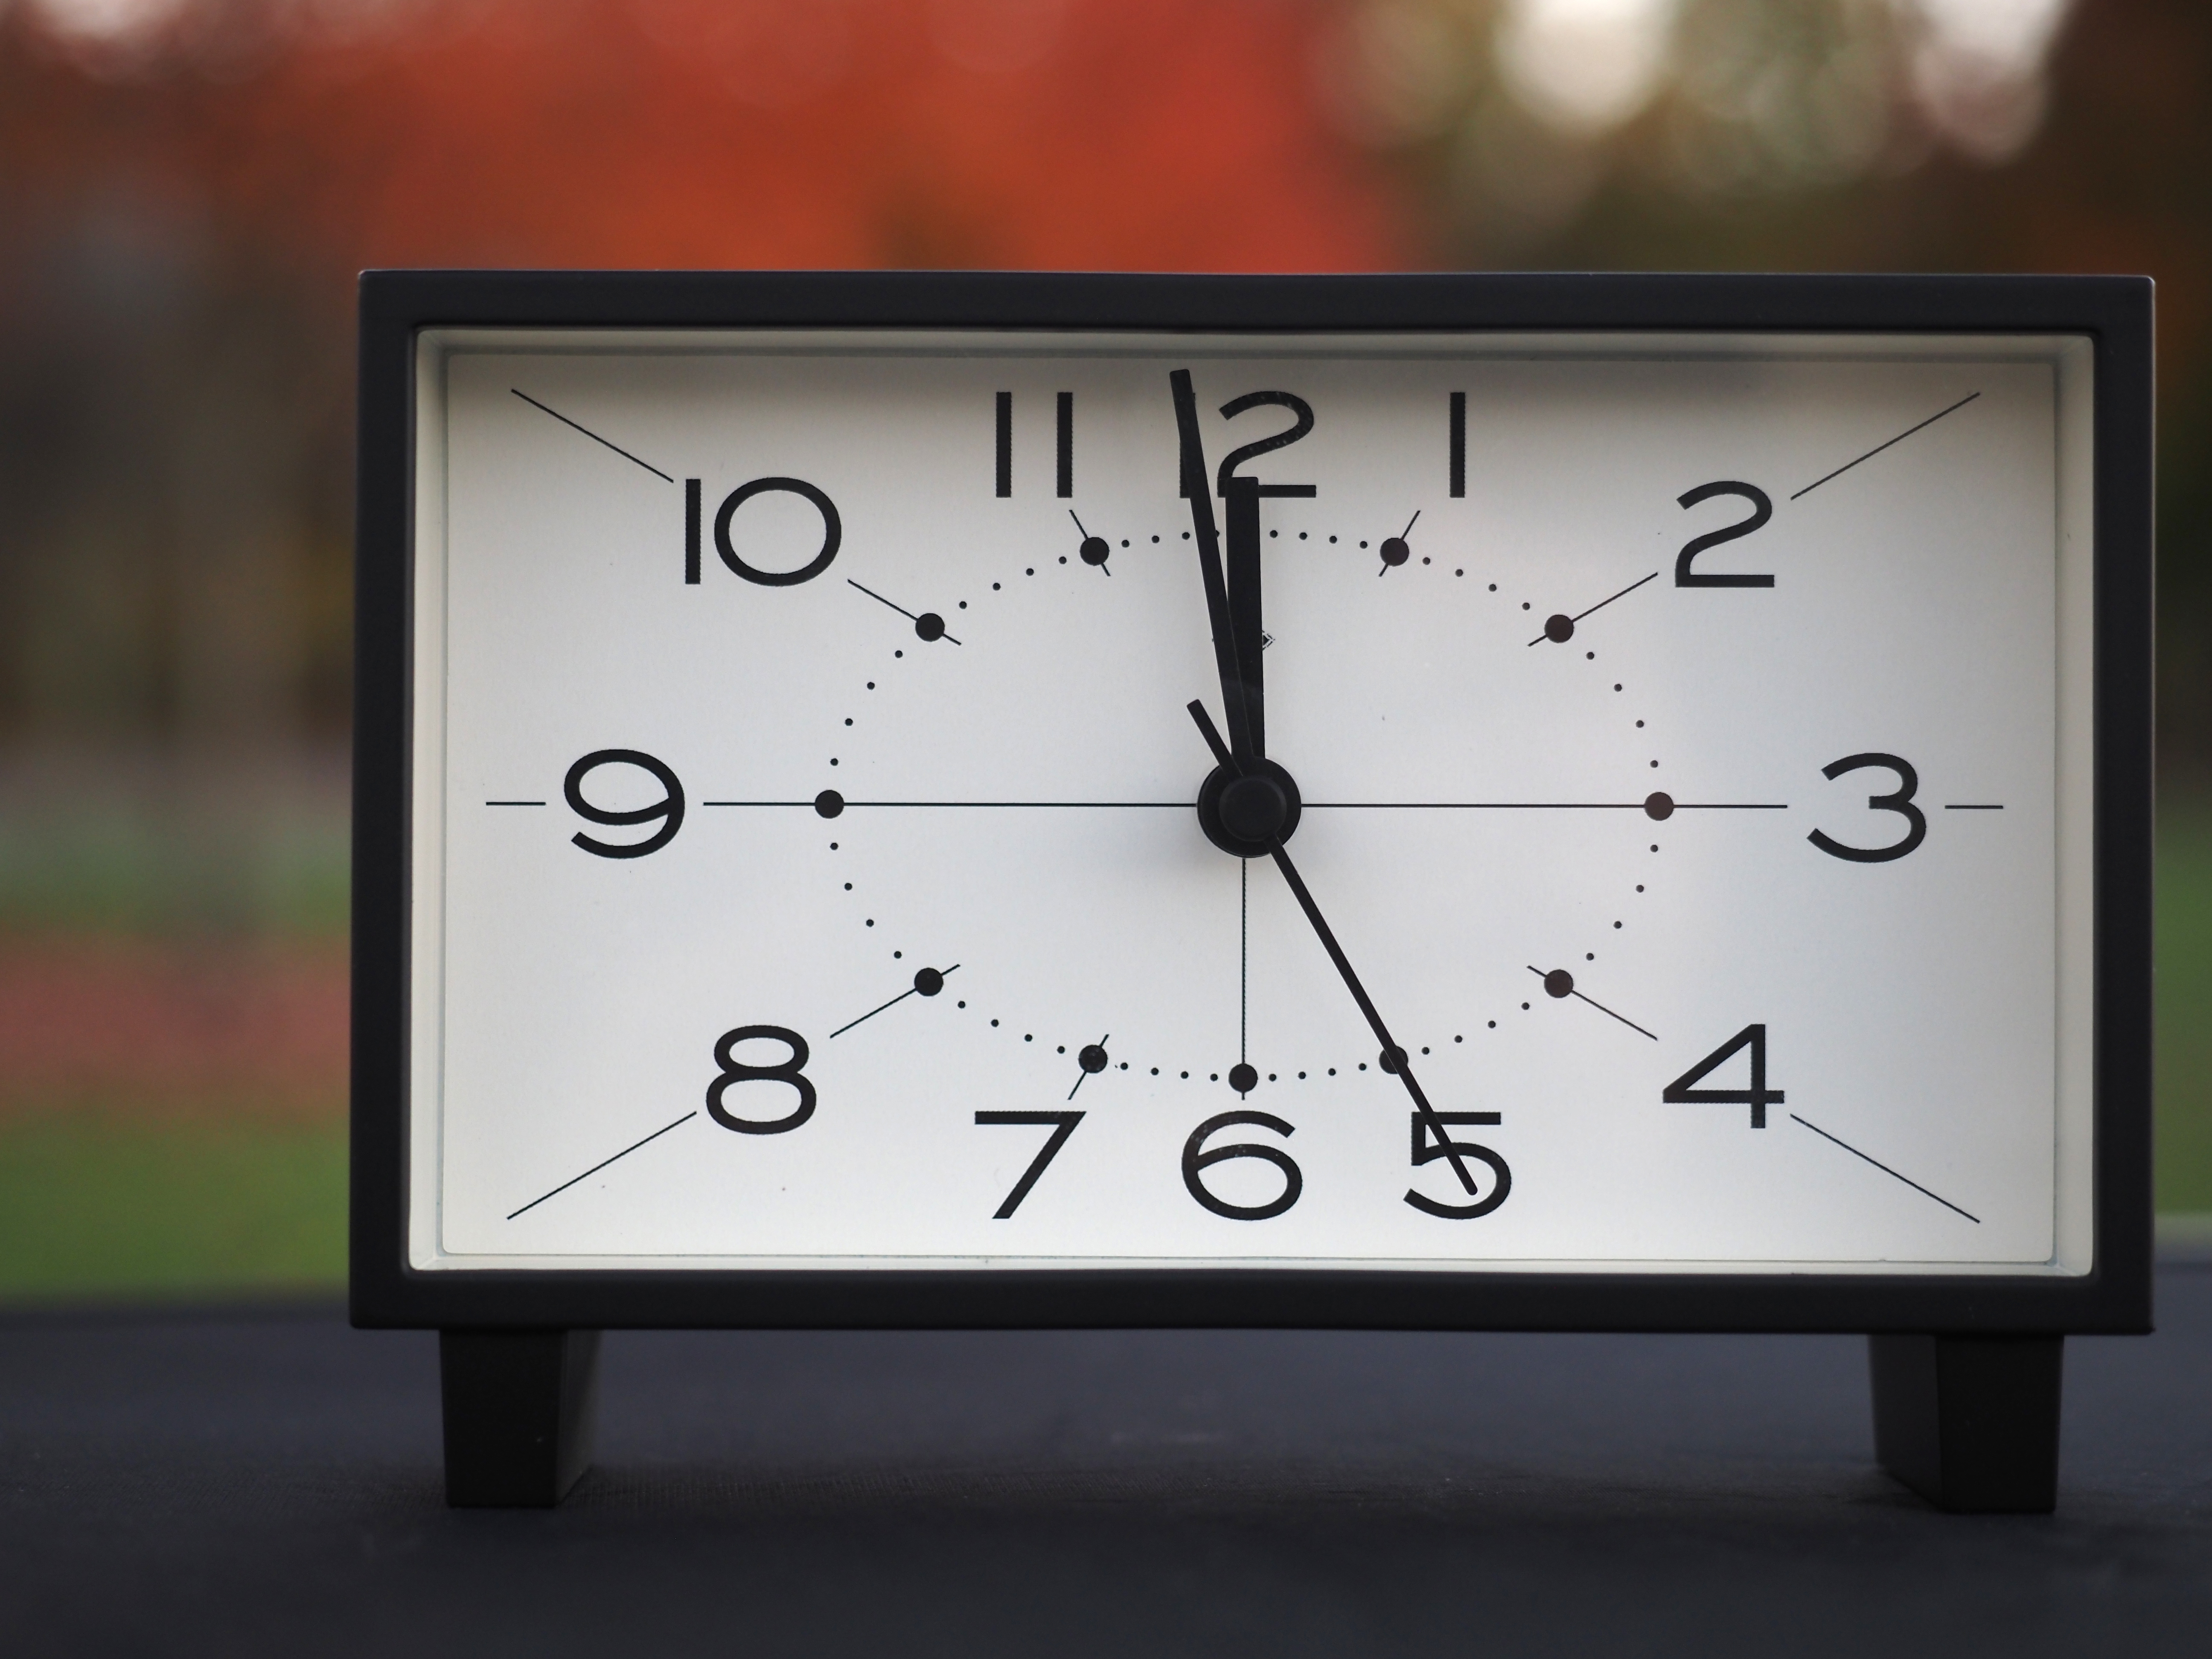 Daylight Saving Time: When does time change? Didn't Alabama adopt DST?